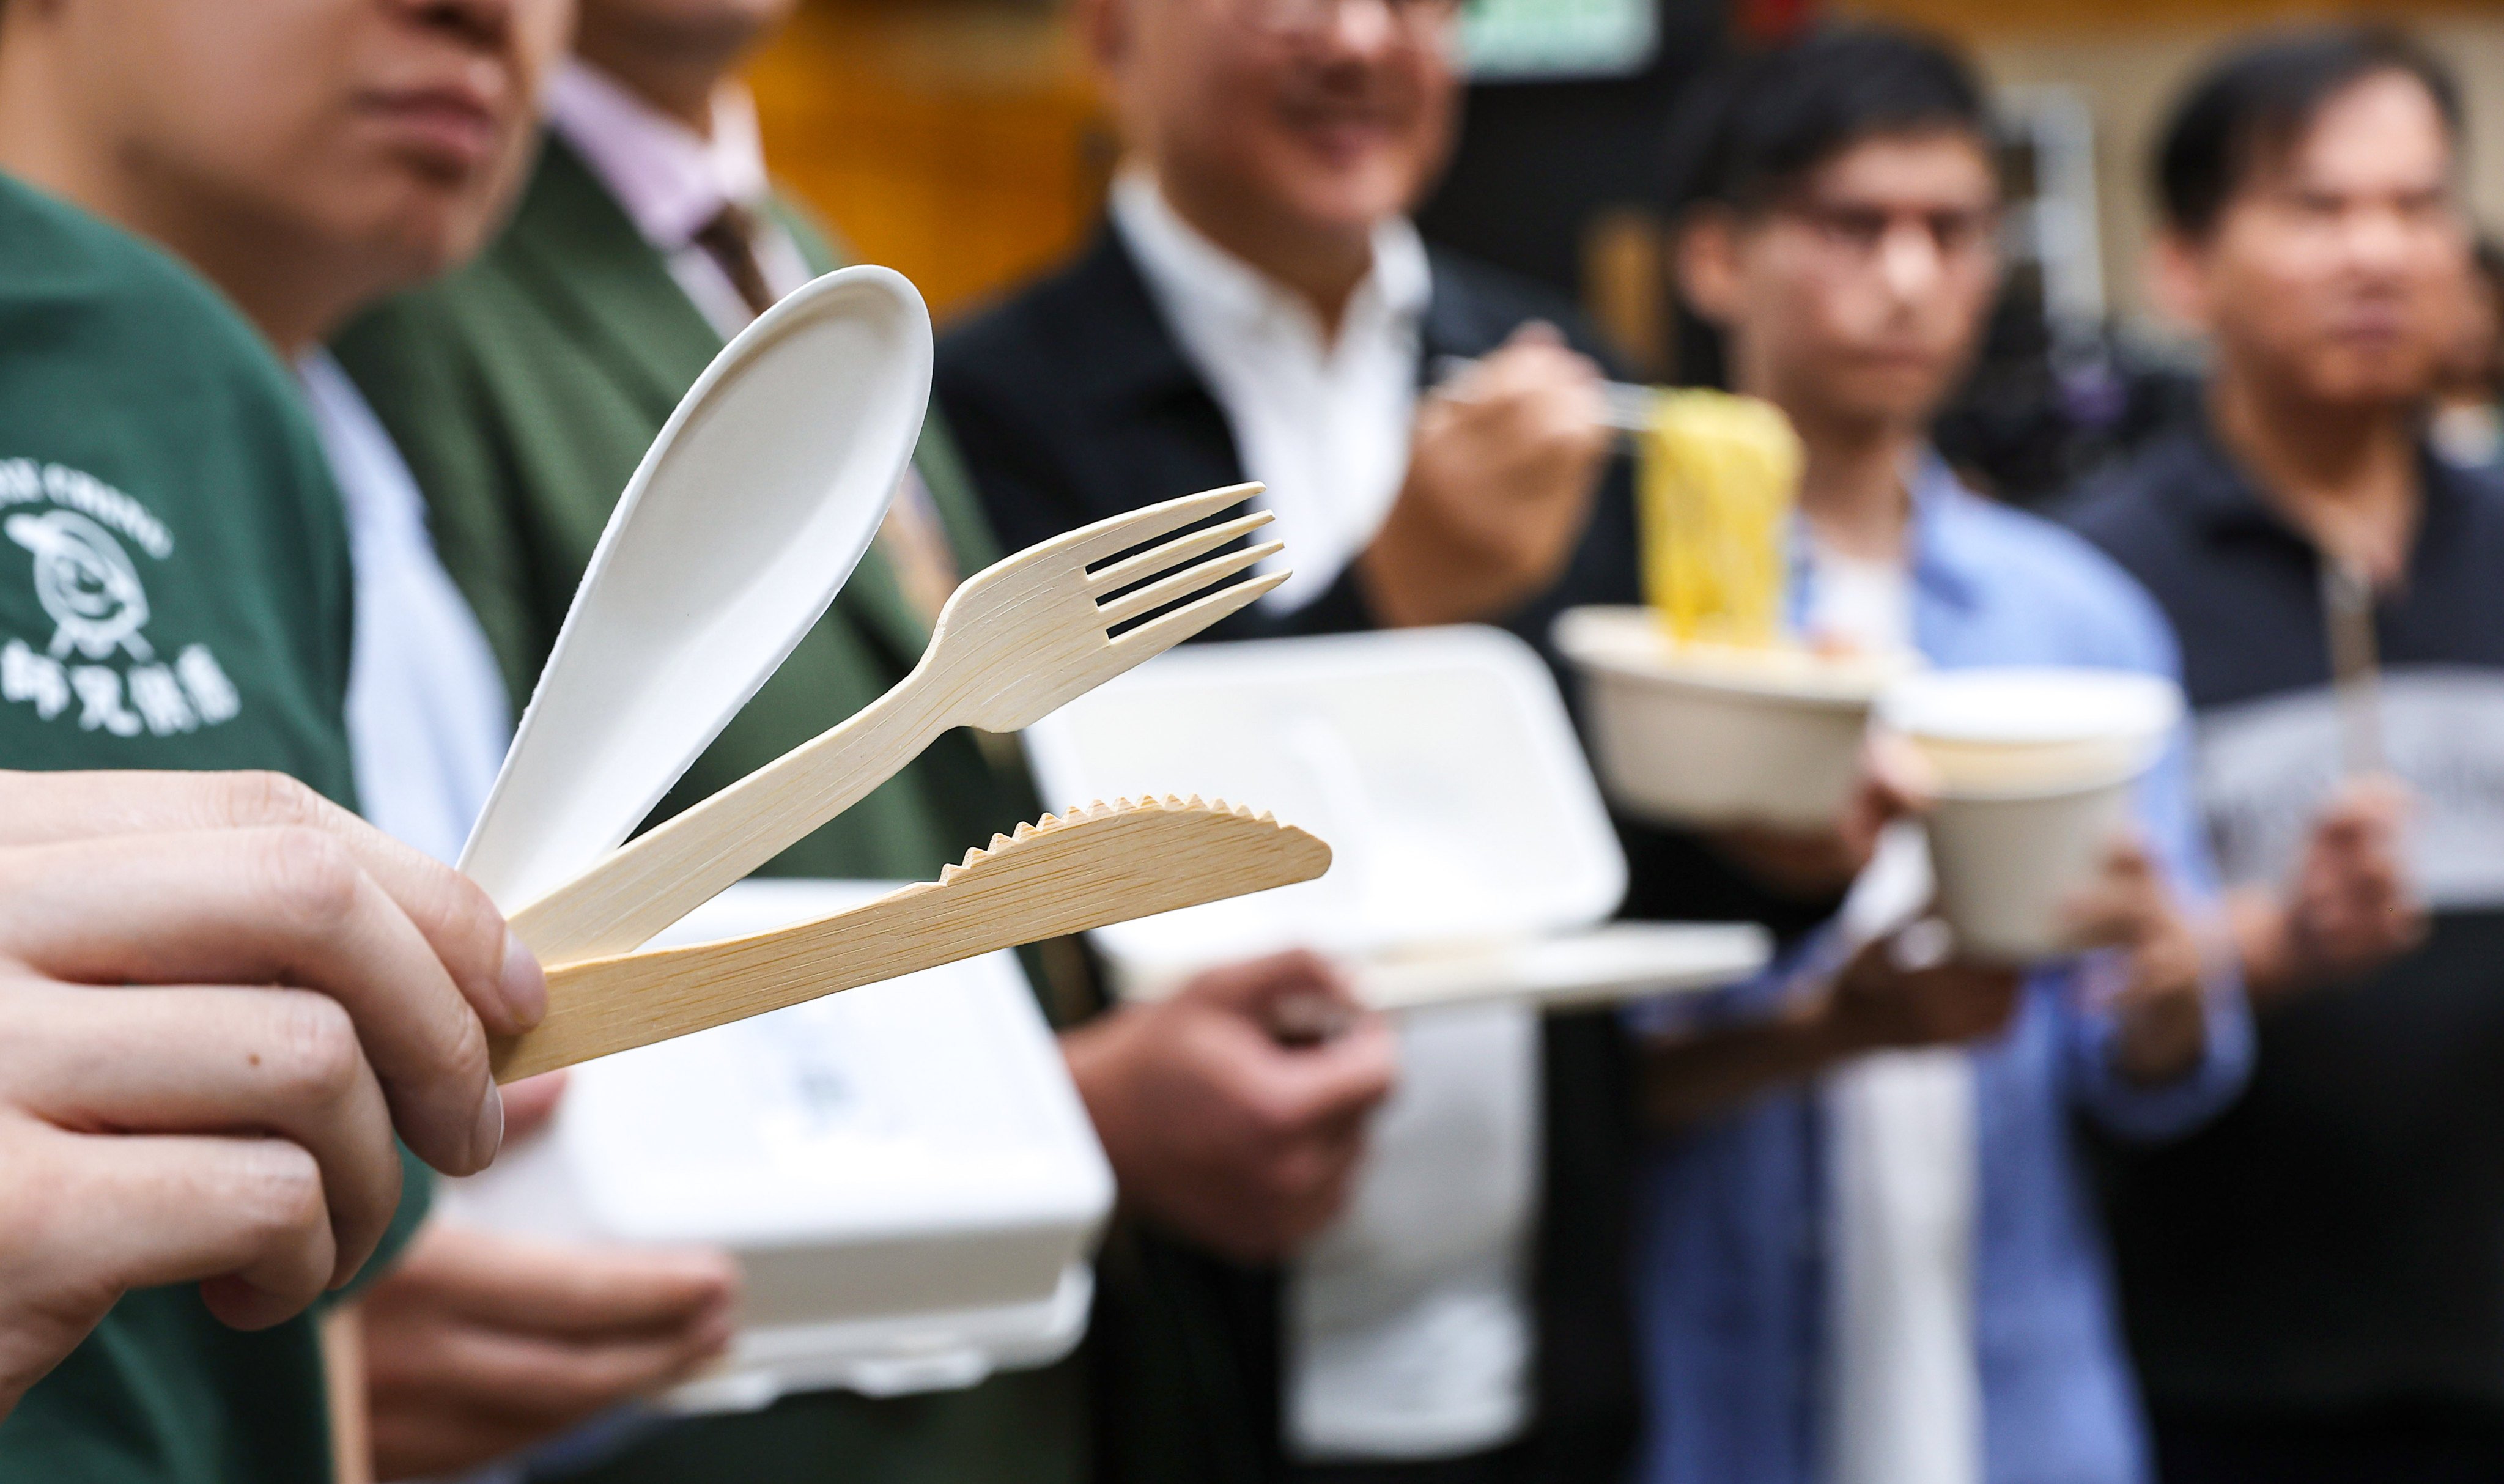 Alternatives to plastic utensils on display. The first phase of a ban on single-use plastics took effect last week. Photo: Edmond So